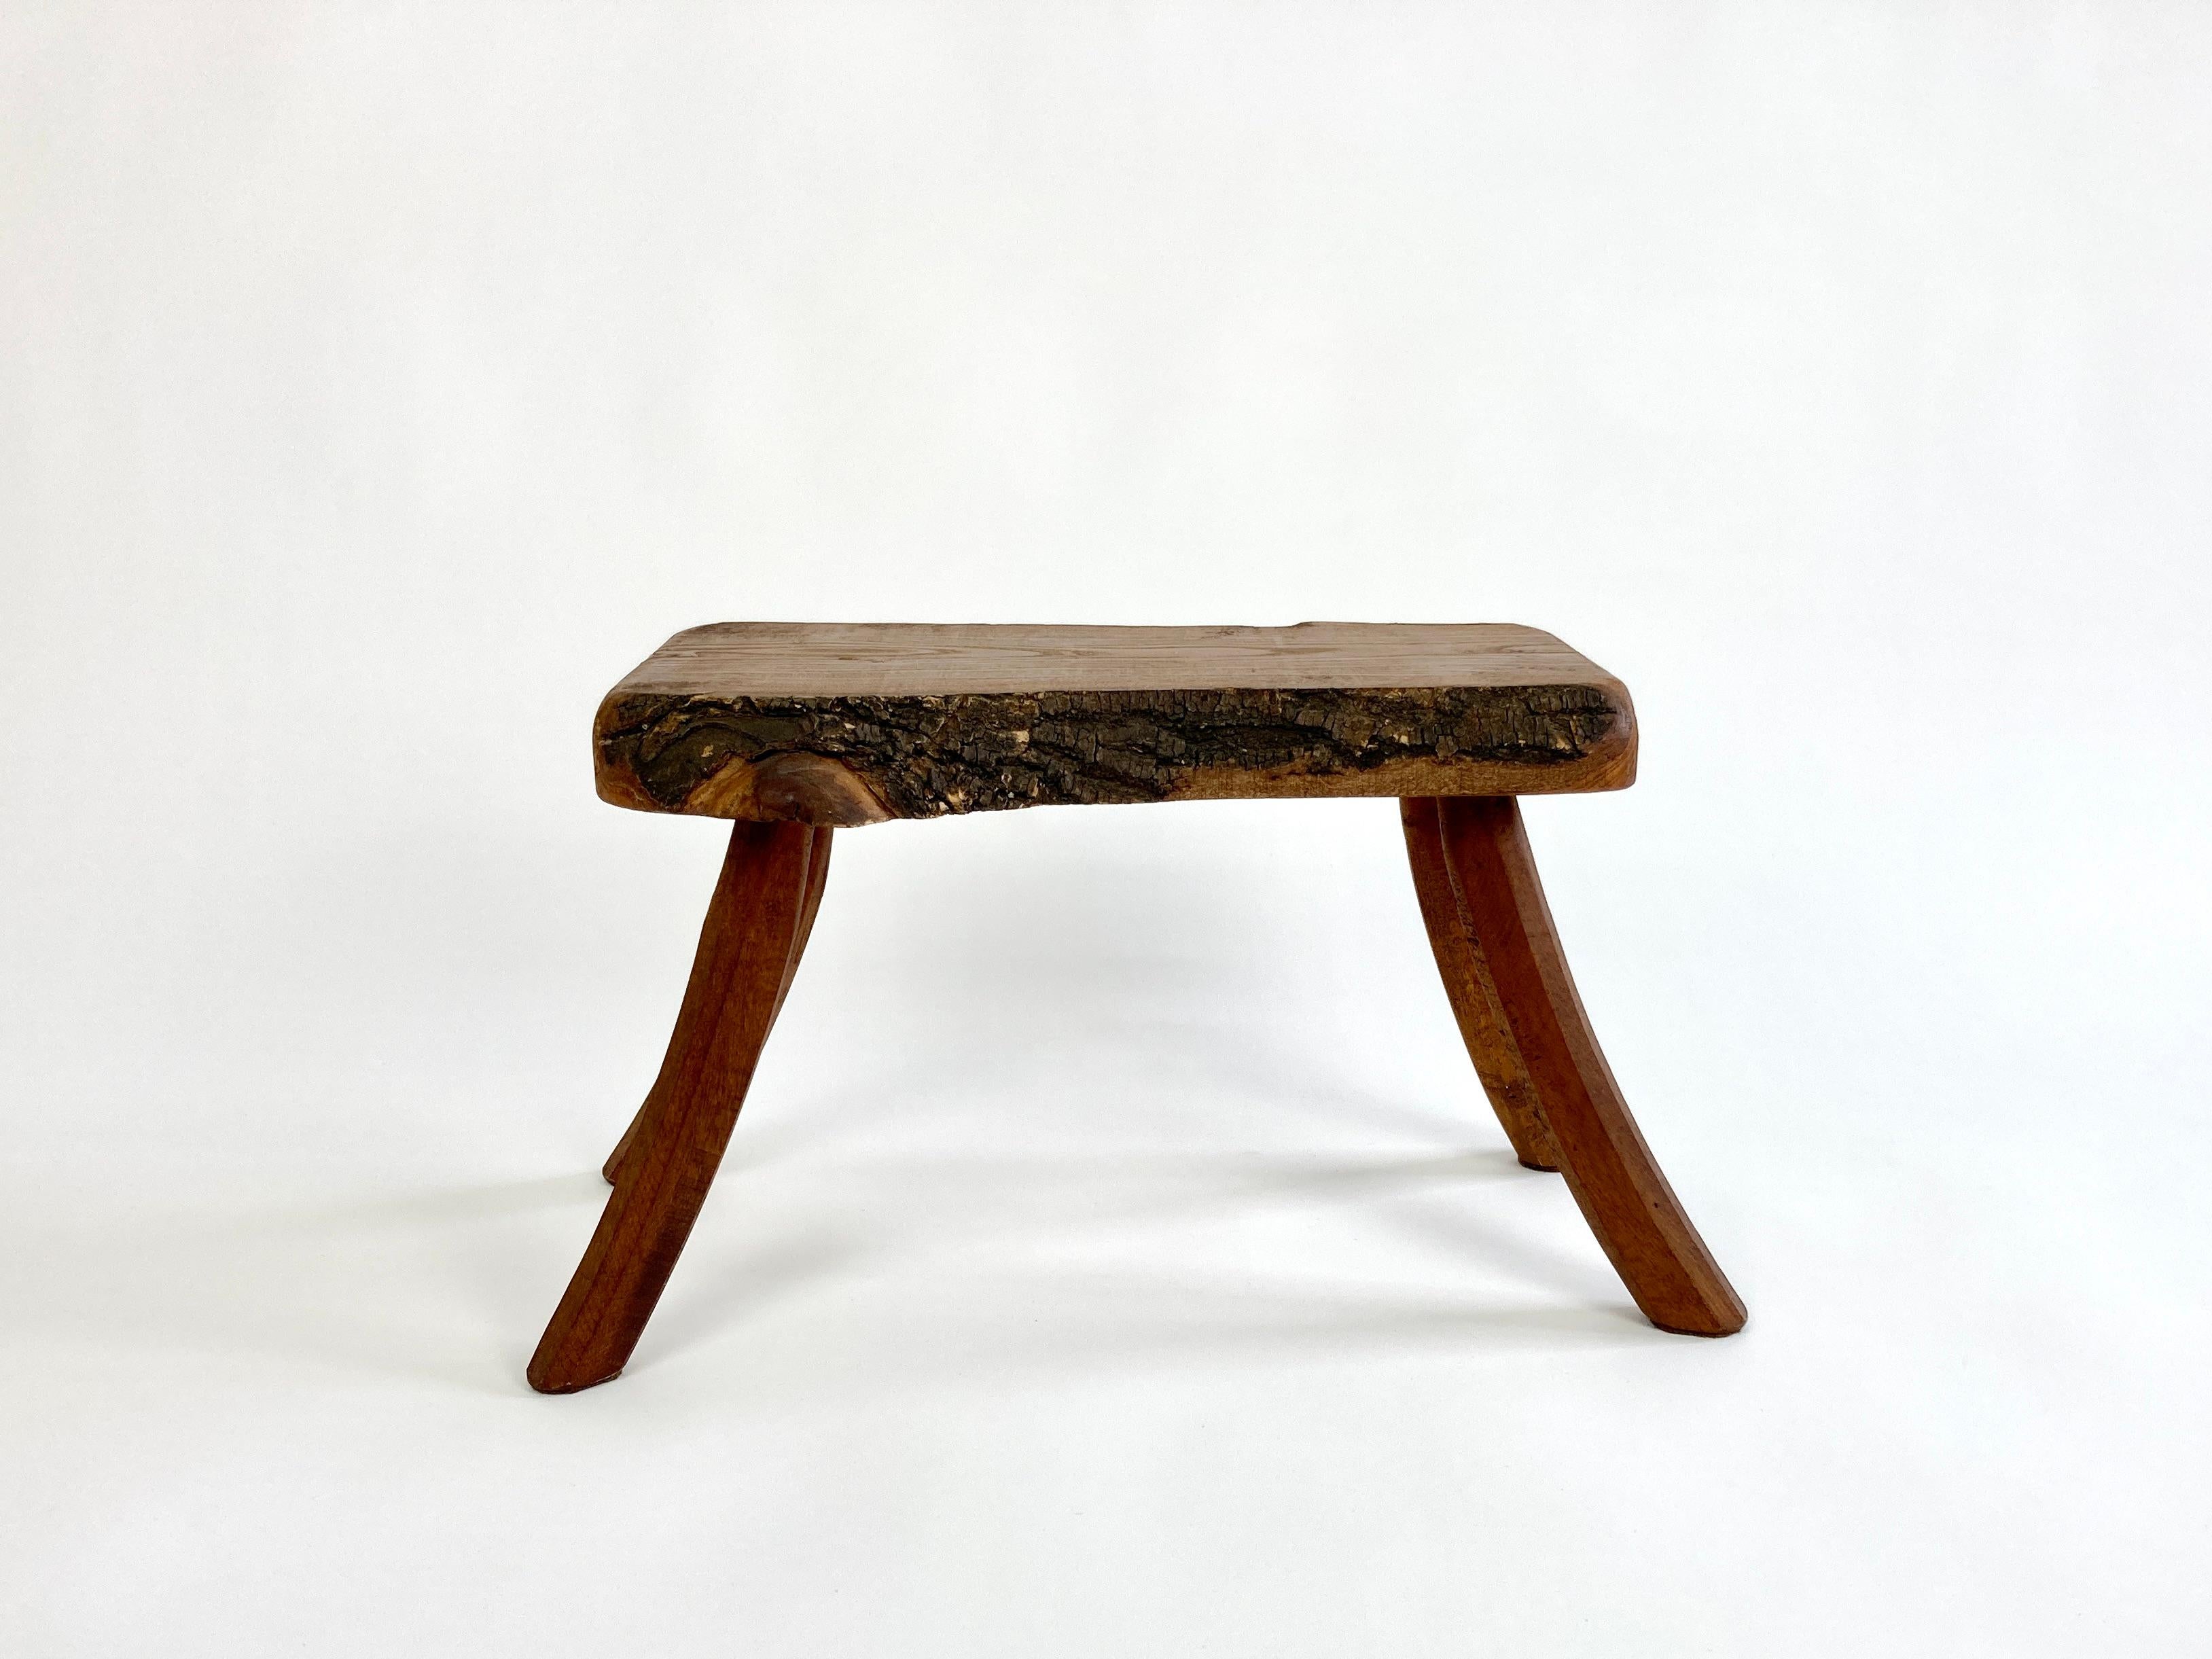 Mid 20th century primitive stool / side table from the Netherlands with a raw natural live bark edge top and gently curved legs. 

Well built and well proportioned, would make a great little low/side table.

Made of hardwoods (oak, possibly